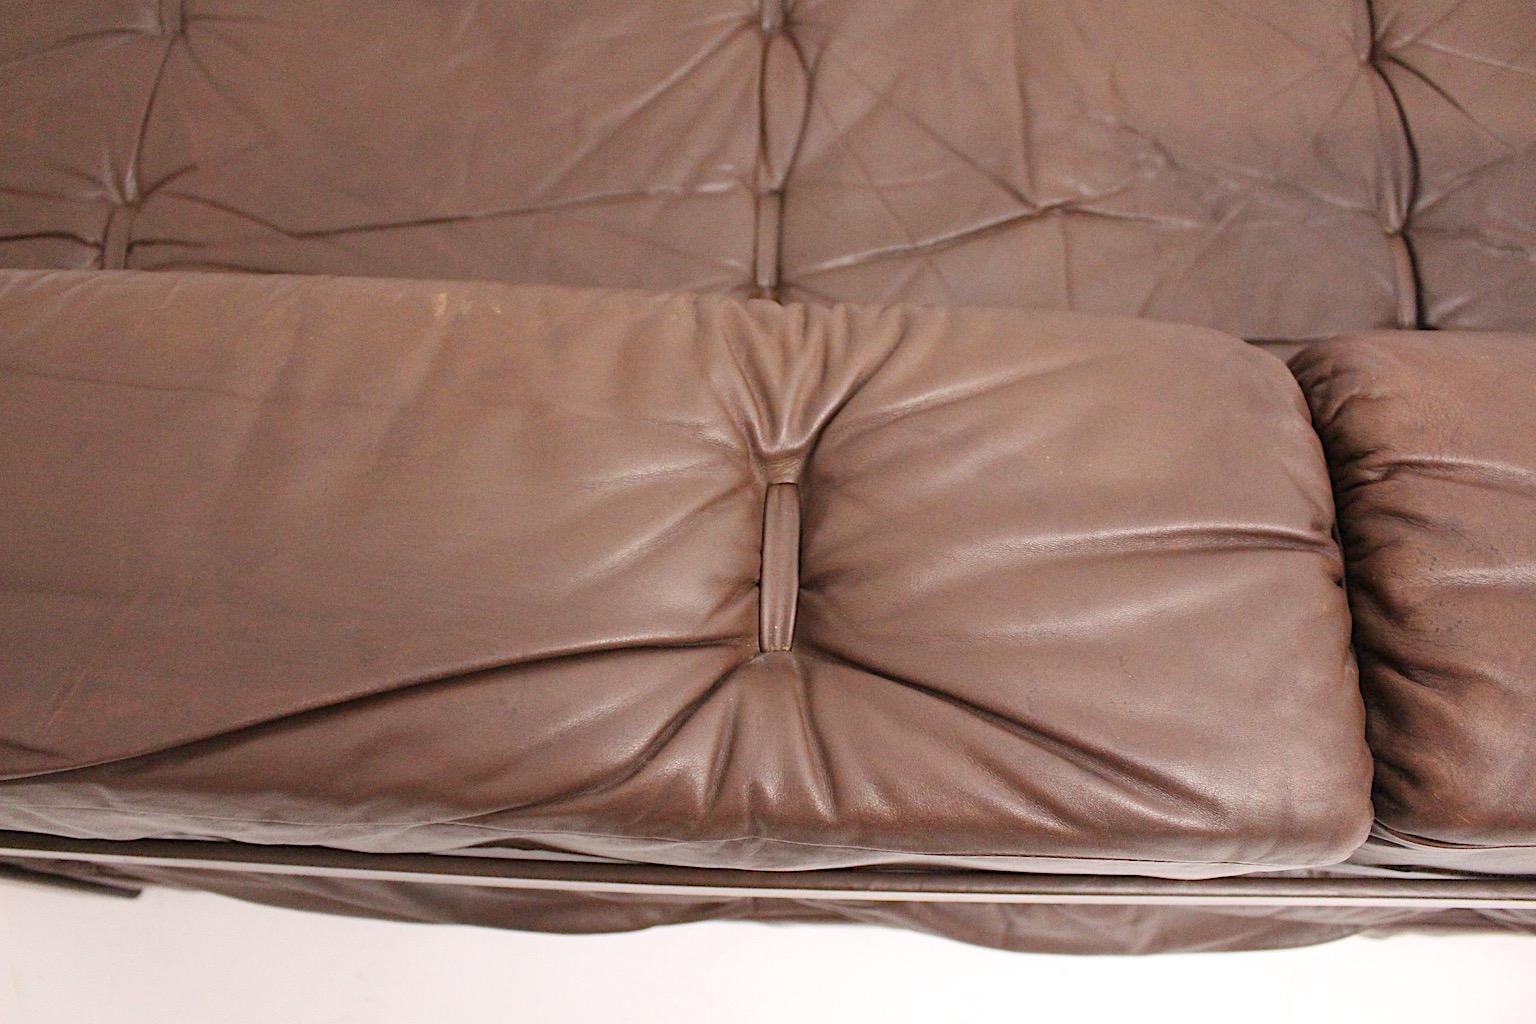 Wittmann Leather Brown Vintage Sofa or Daybed Atrium De Sede Style 1970s Austria For Sale 9